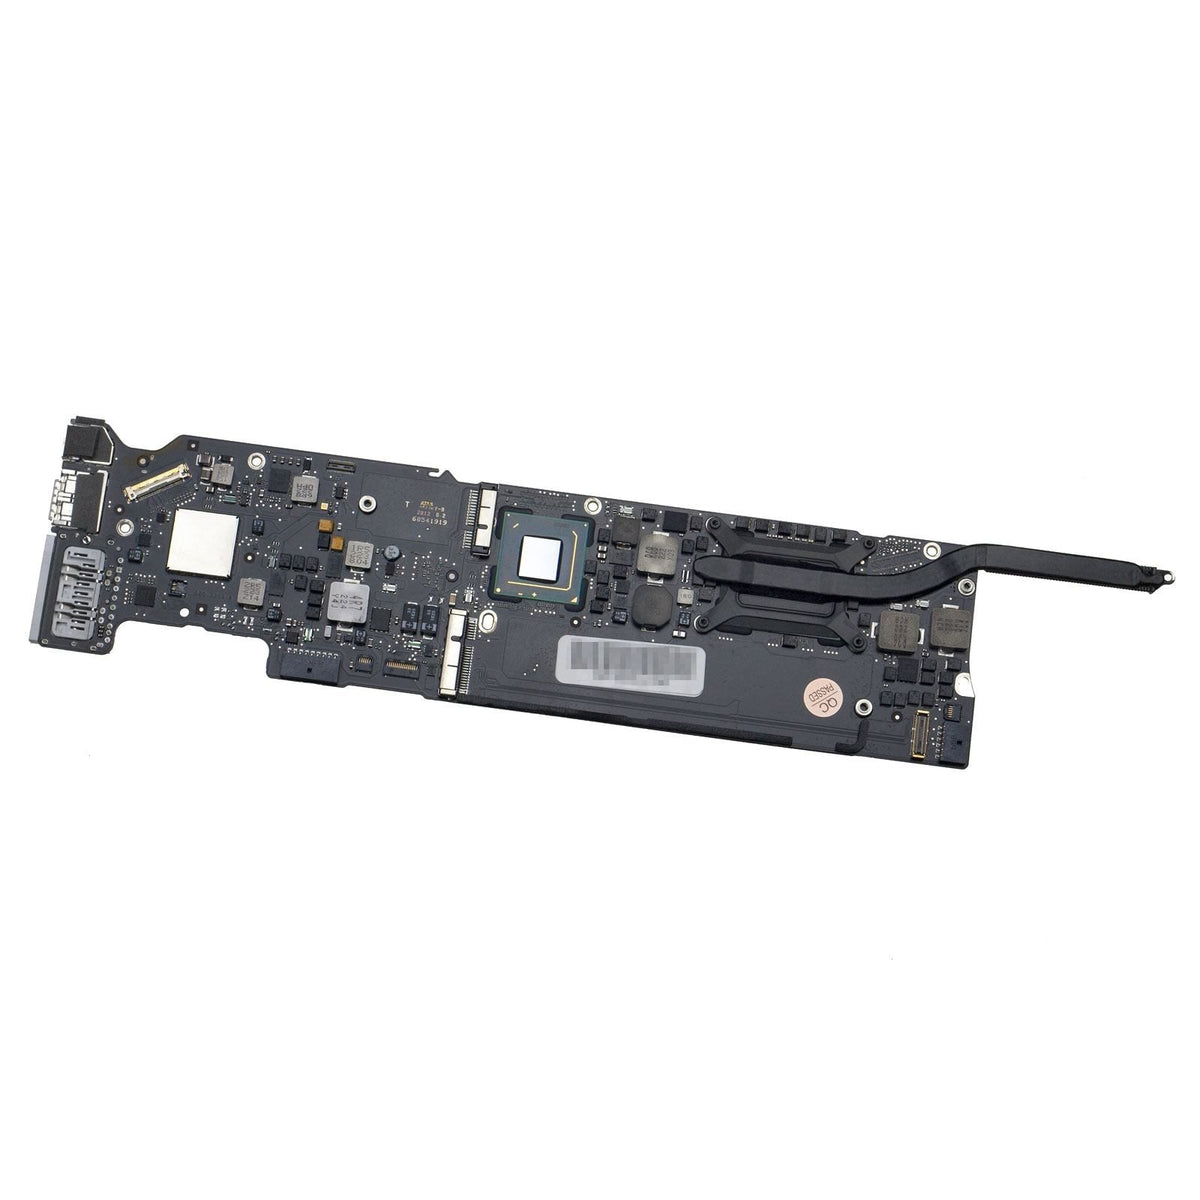 MOTHERBOARD FOR MACBOOK AIR 13" A1466 (MID 2012)